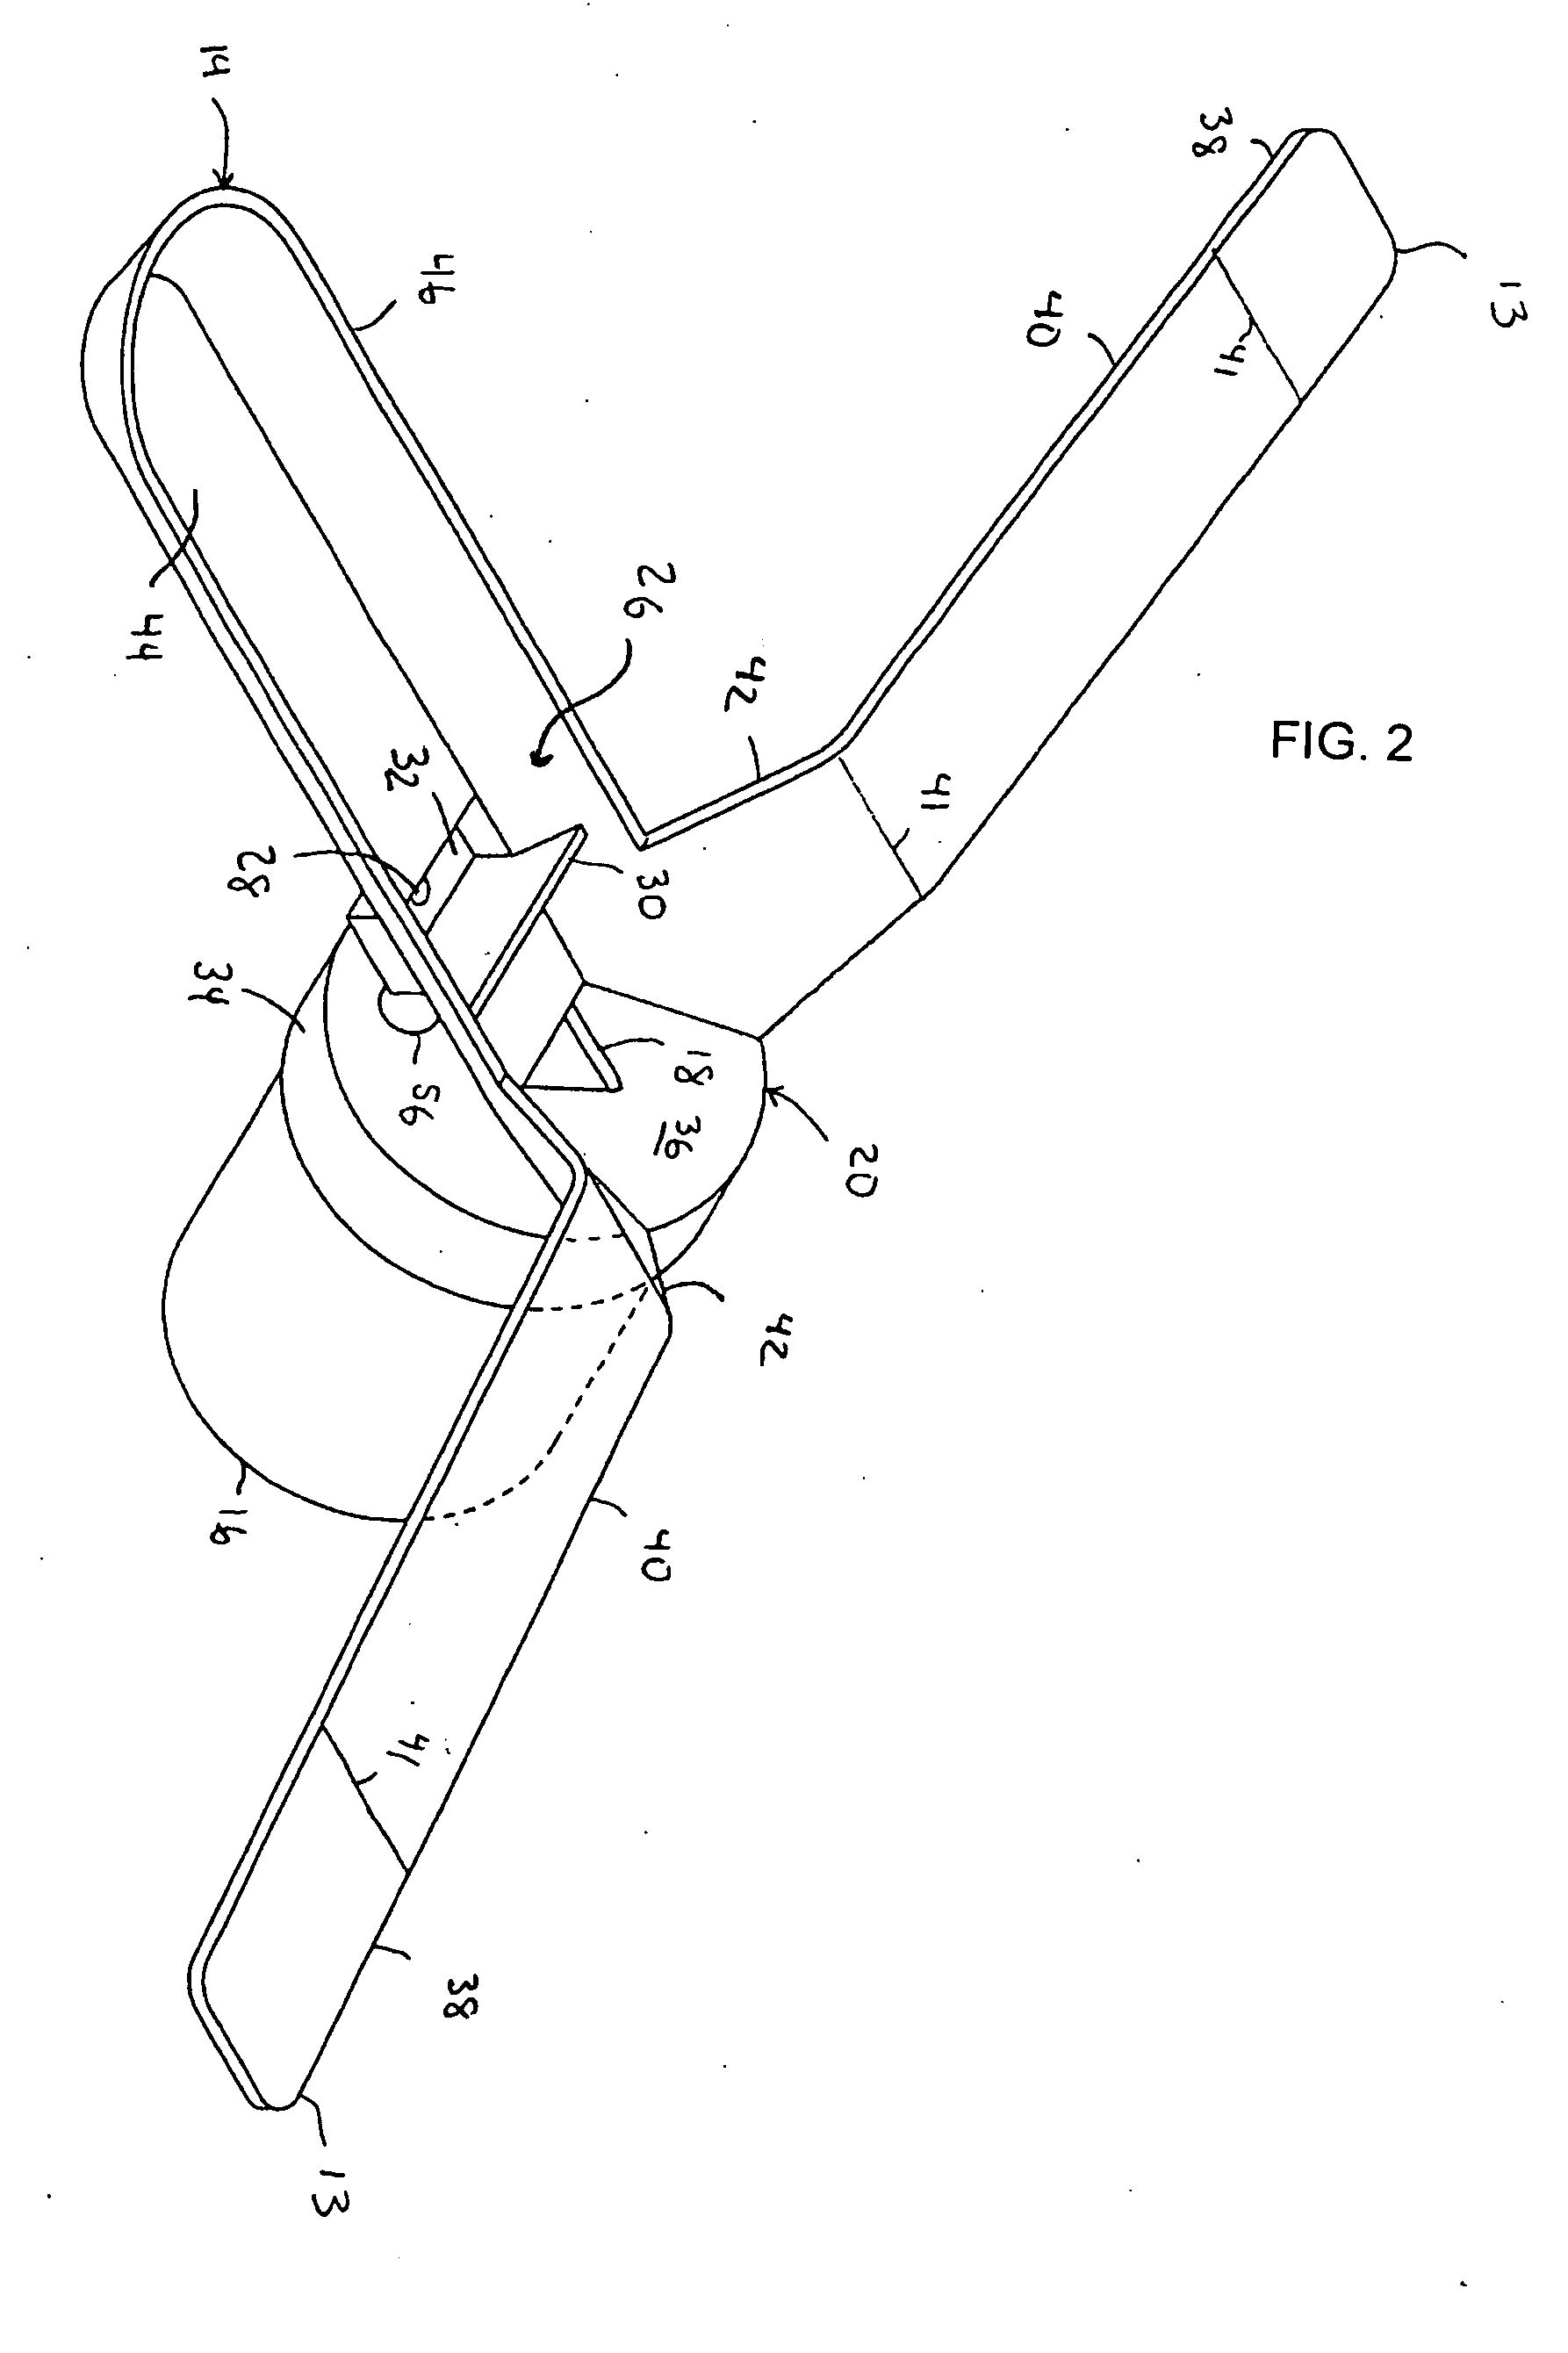 Urine sample collection device